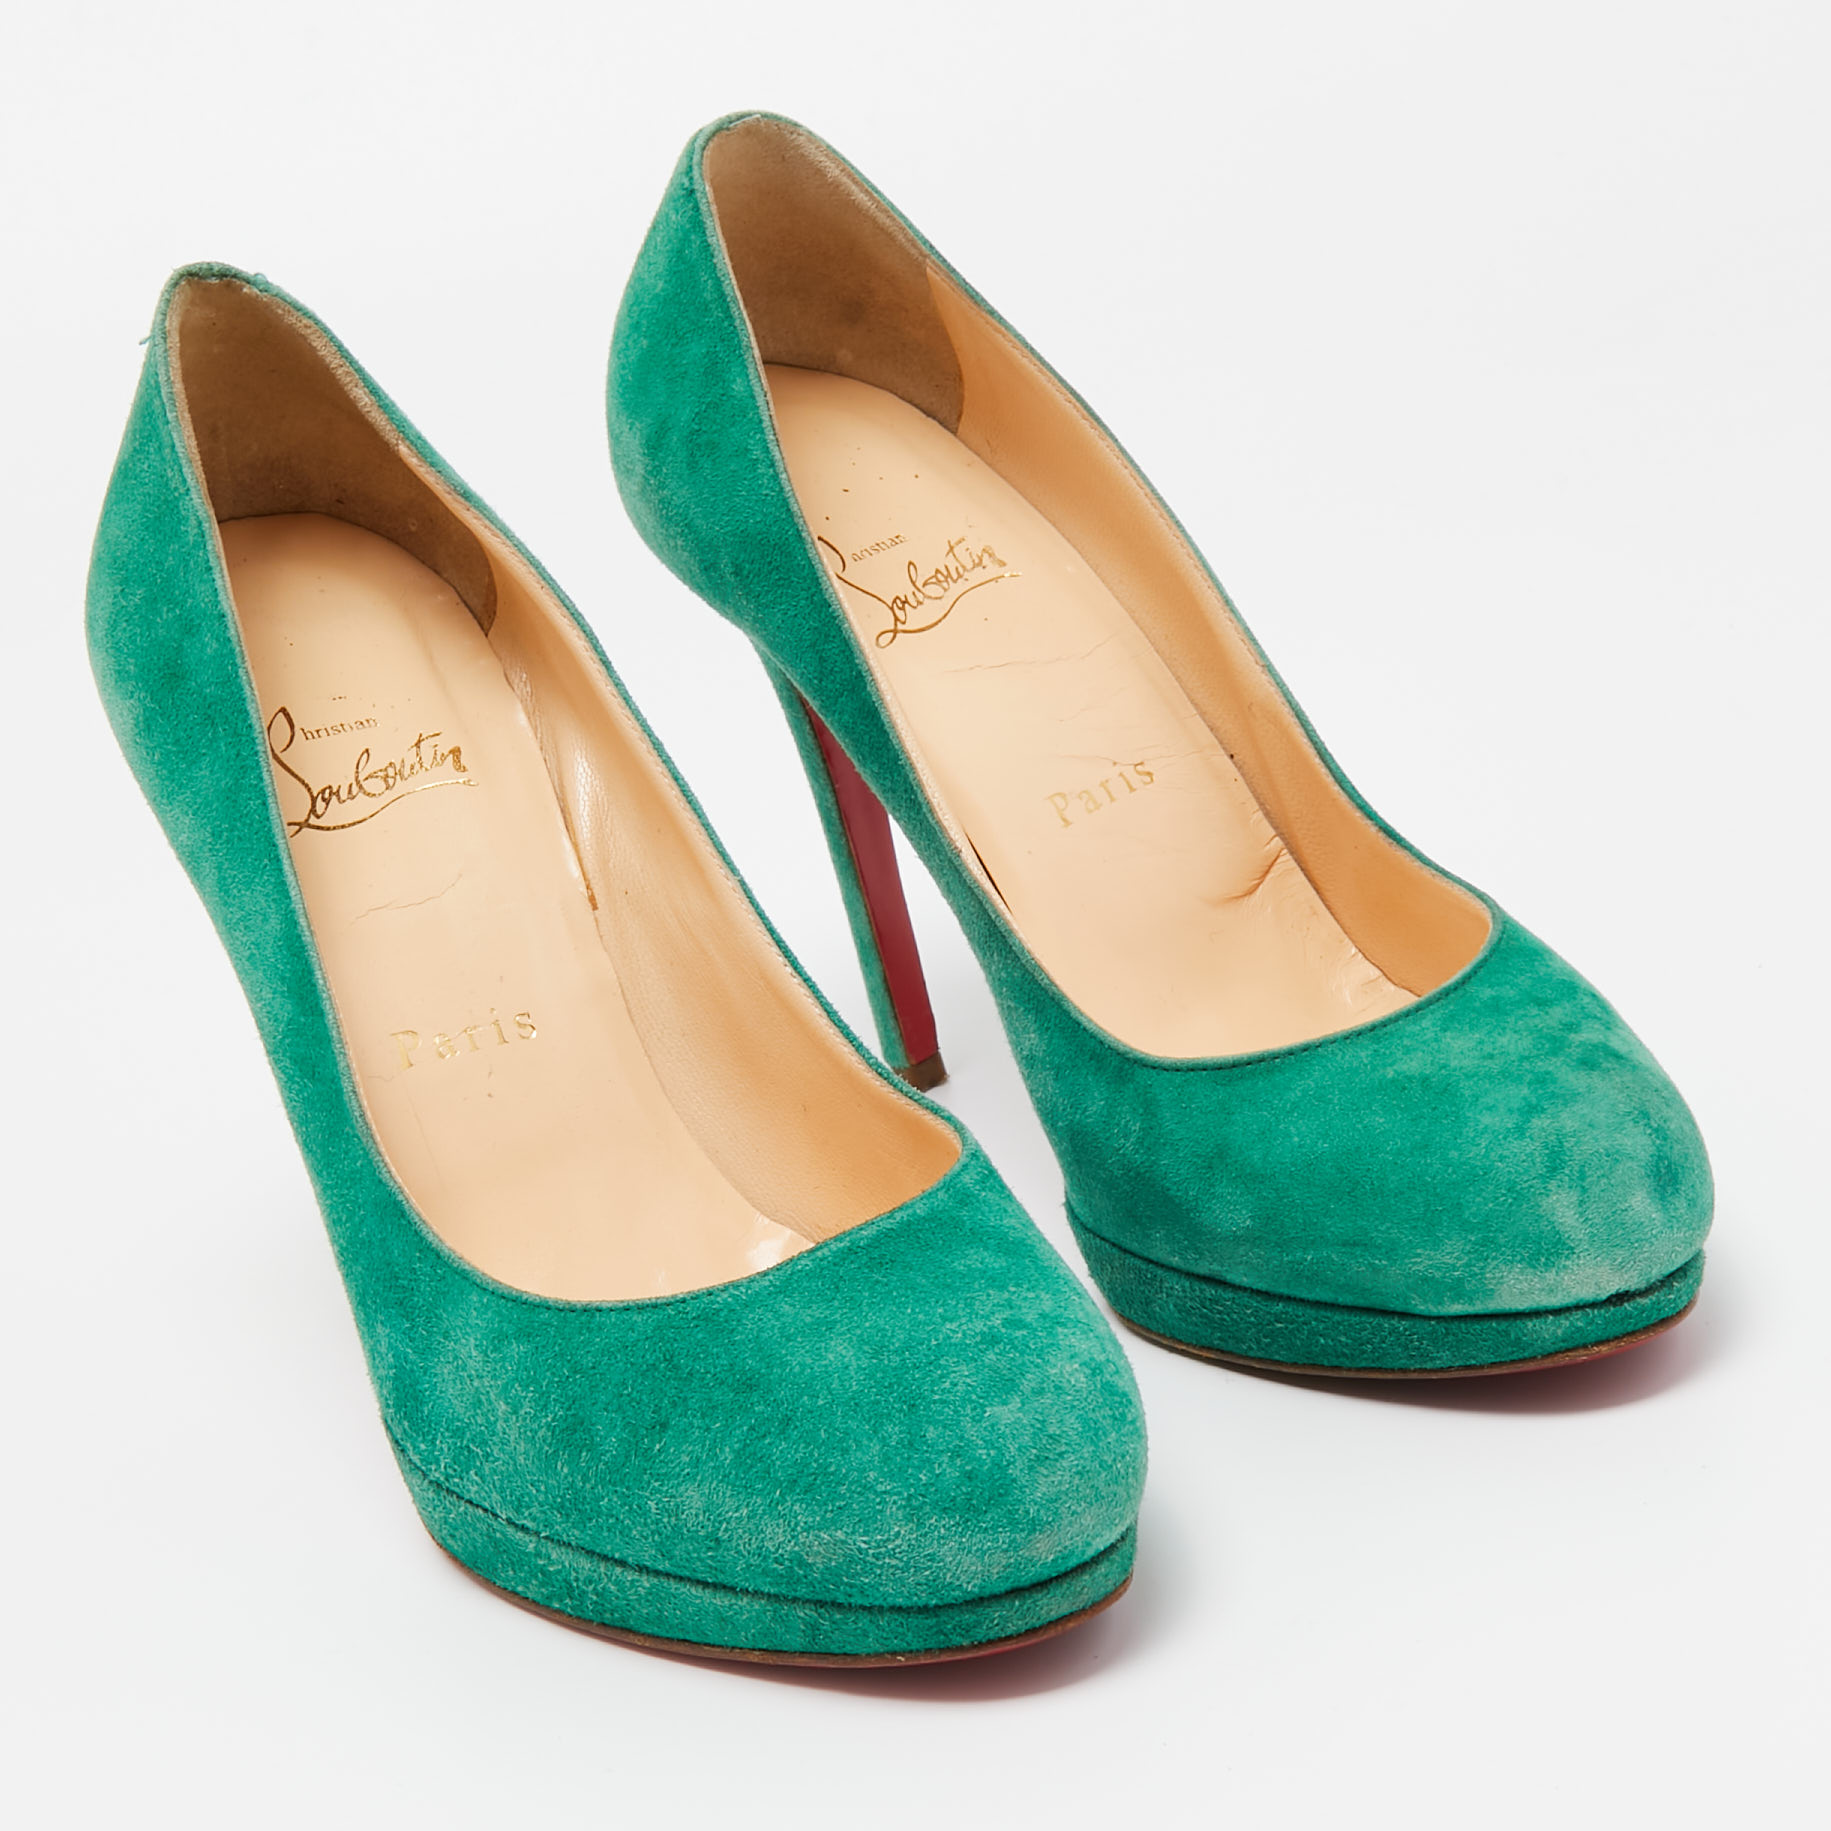 Christian Louboutin Green Suede Round Toe Pumps Size 37.5